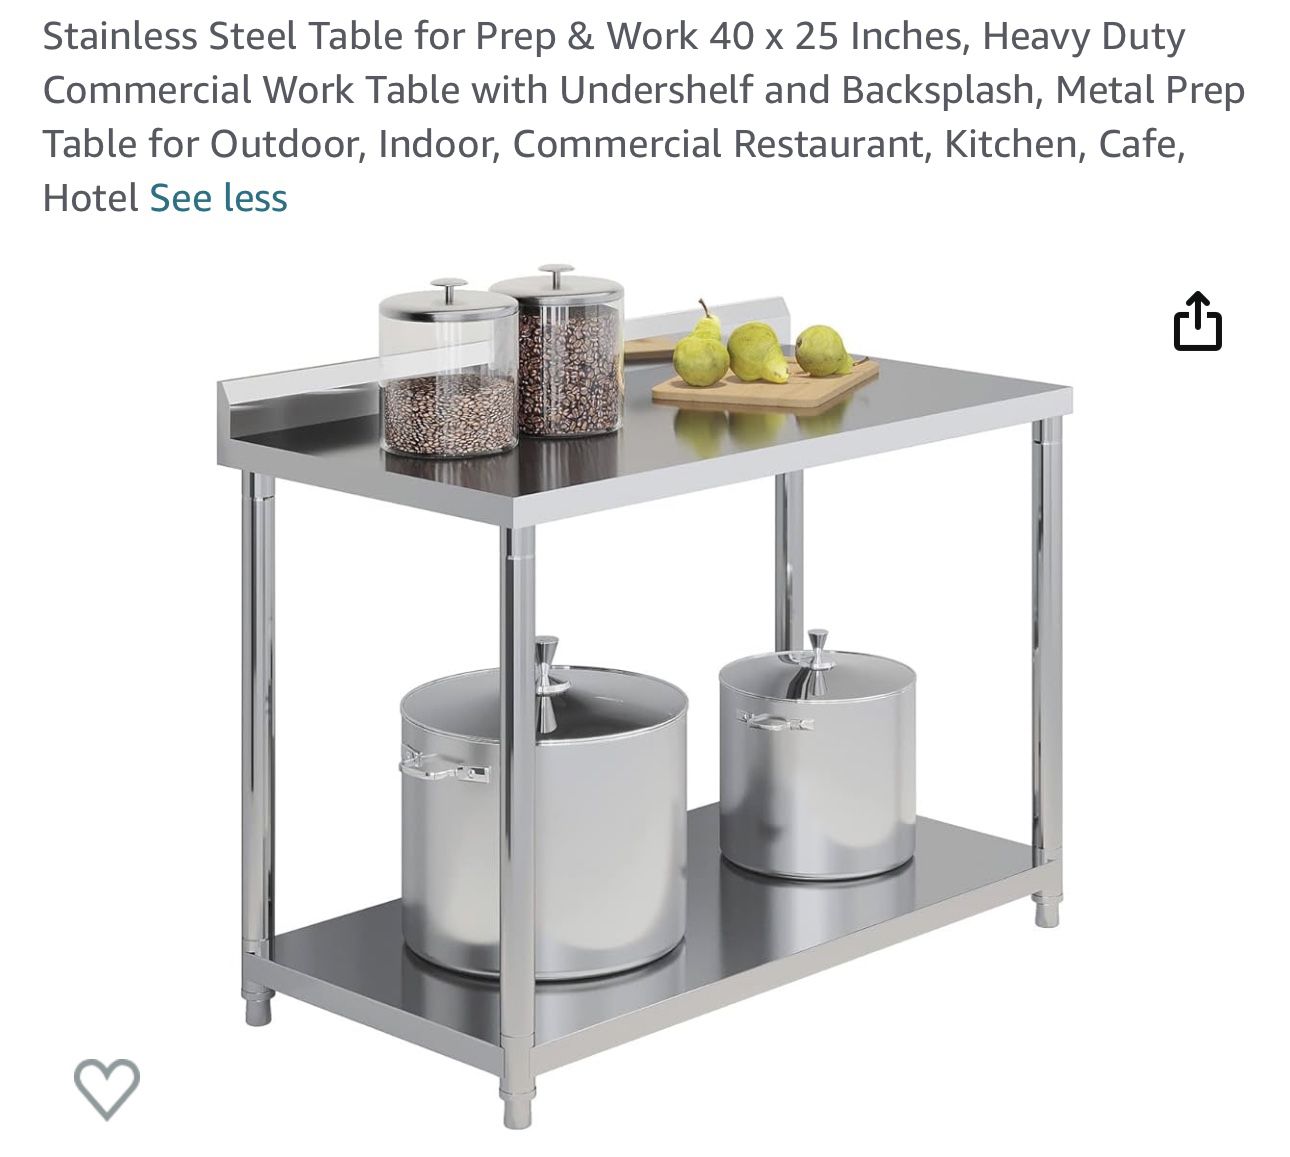 Stainless Steel Table for Prep & Work 40 x 25 Inches, Heavy Duty Commercial Work Table with Undershelf and Backsplash, Metal Prep Table for Outdoor, I